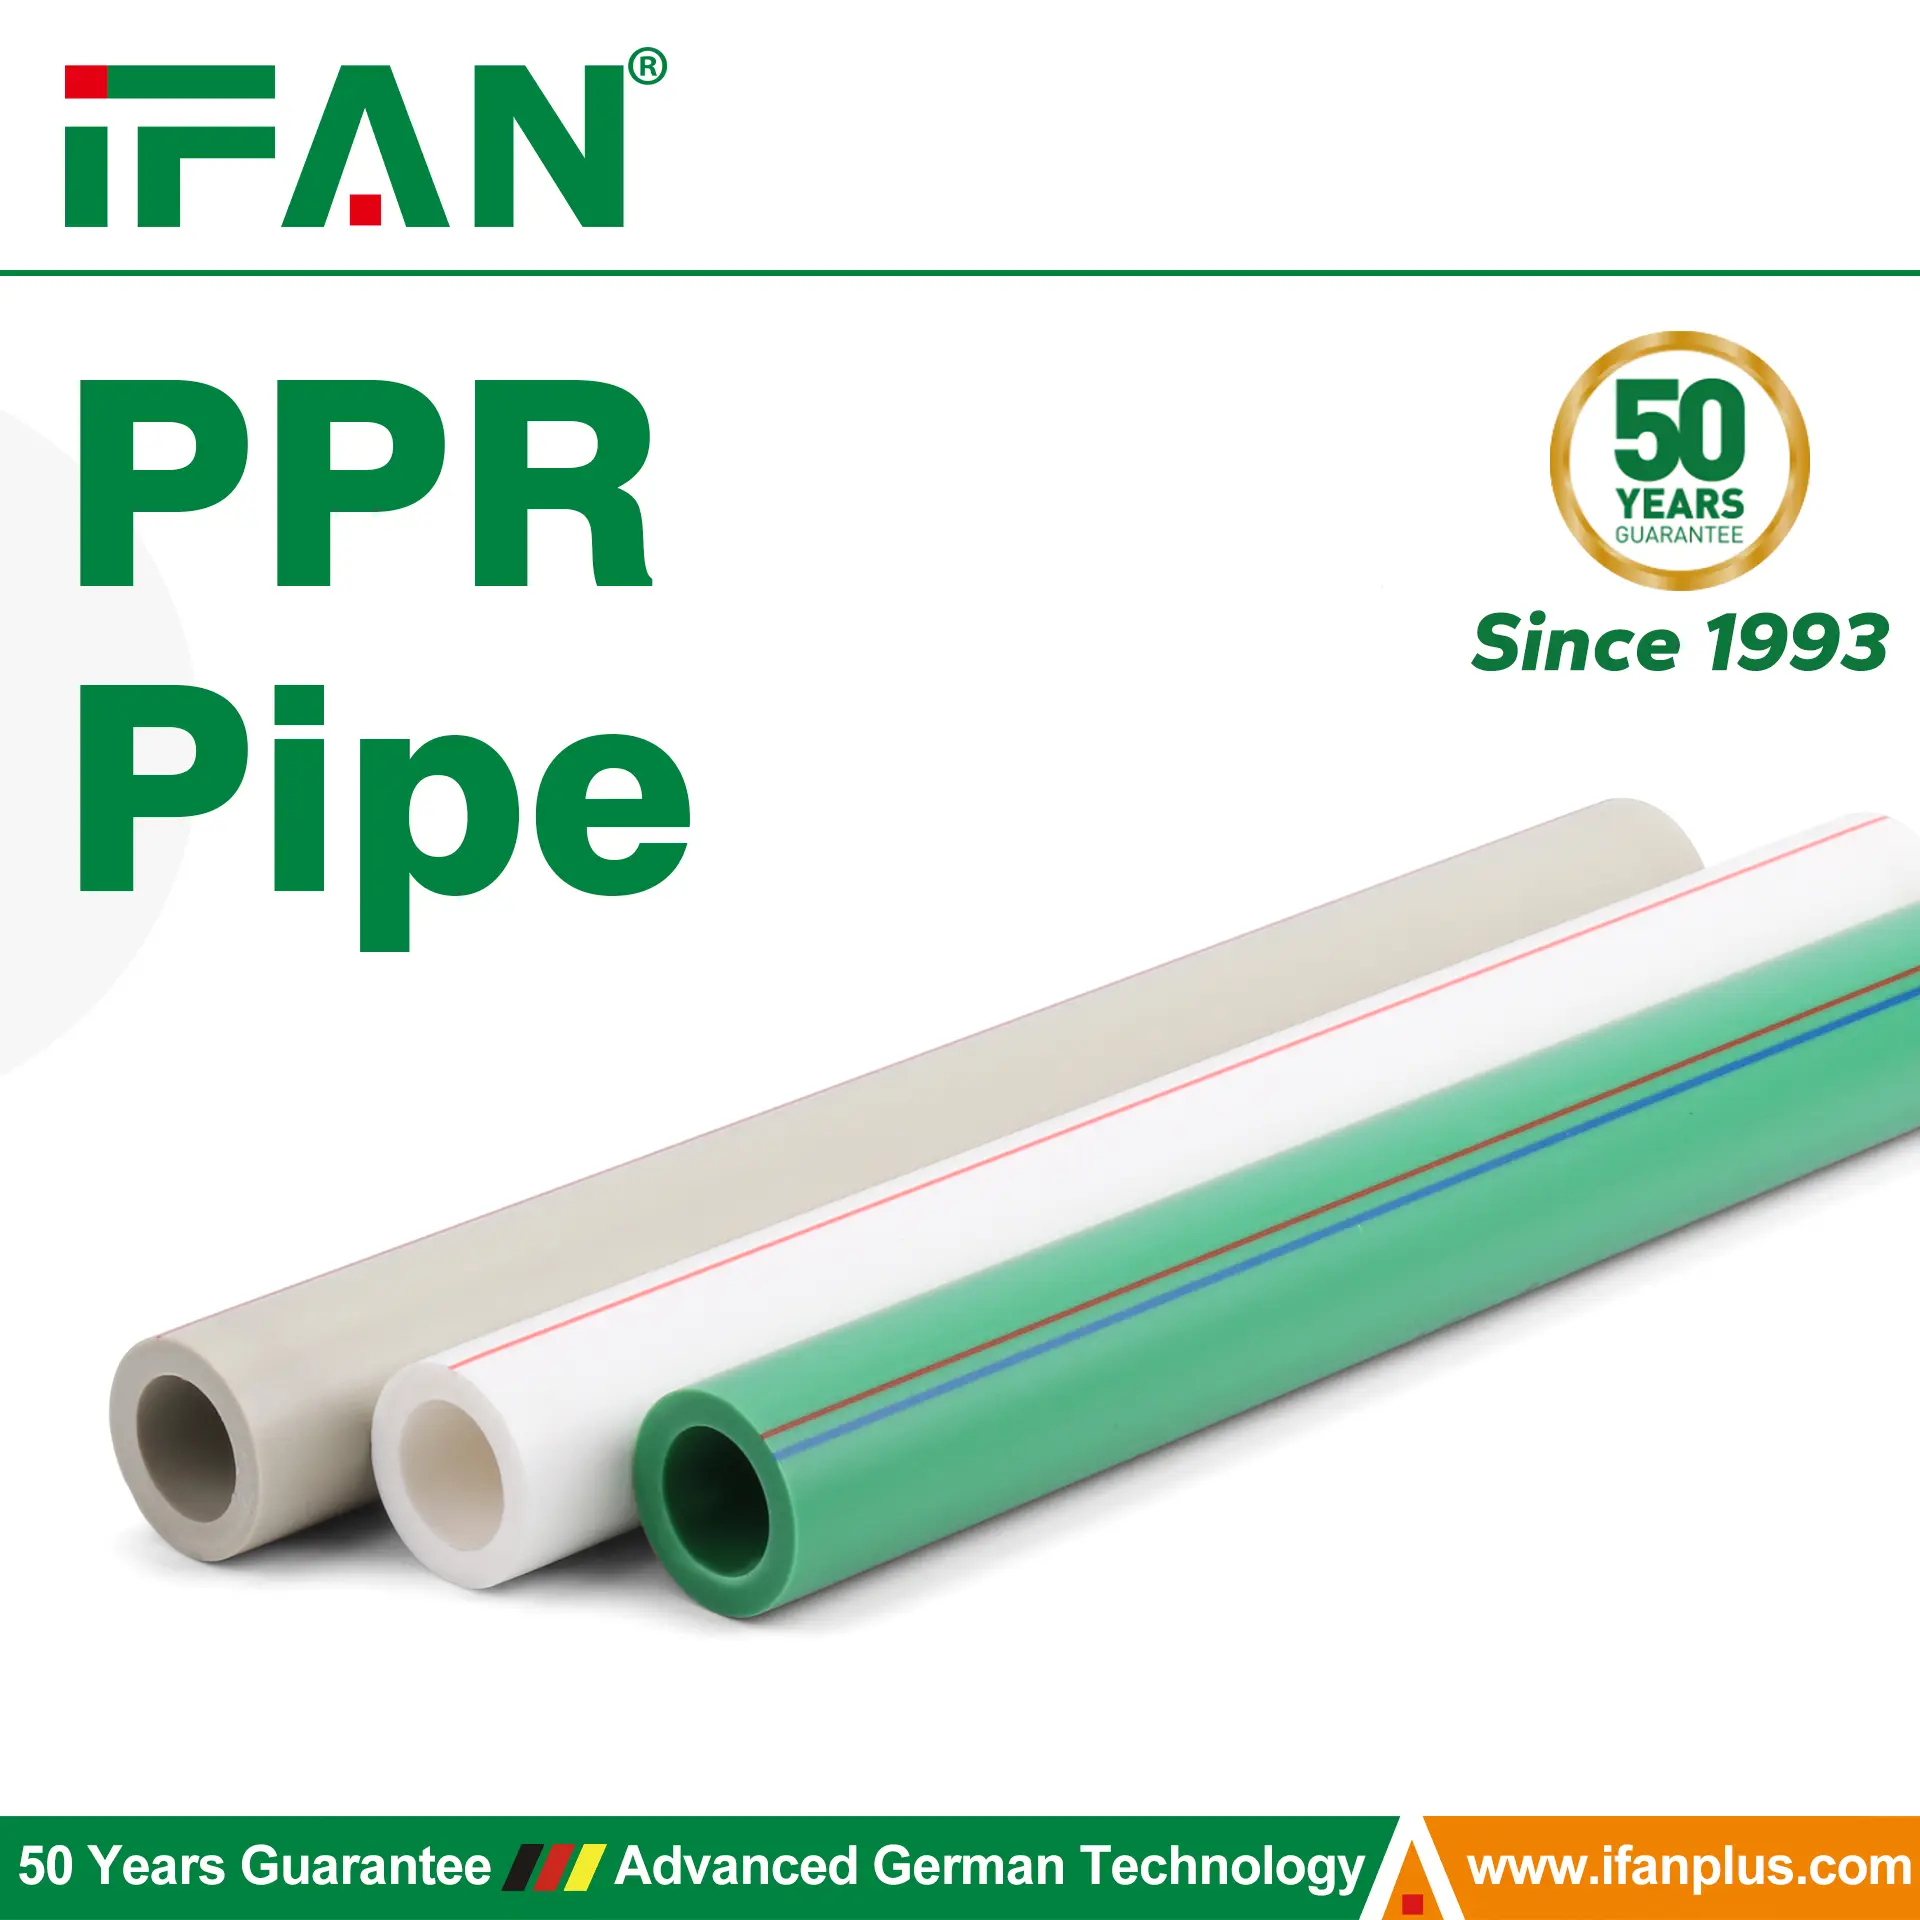 PPR Pipe